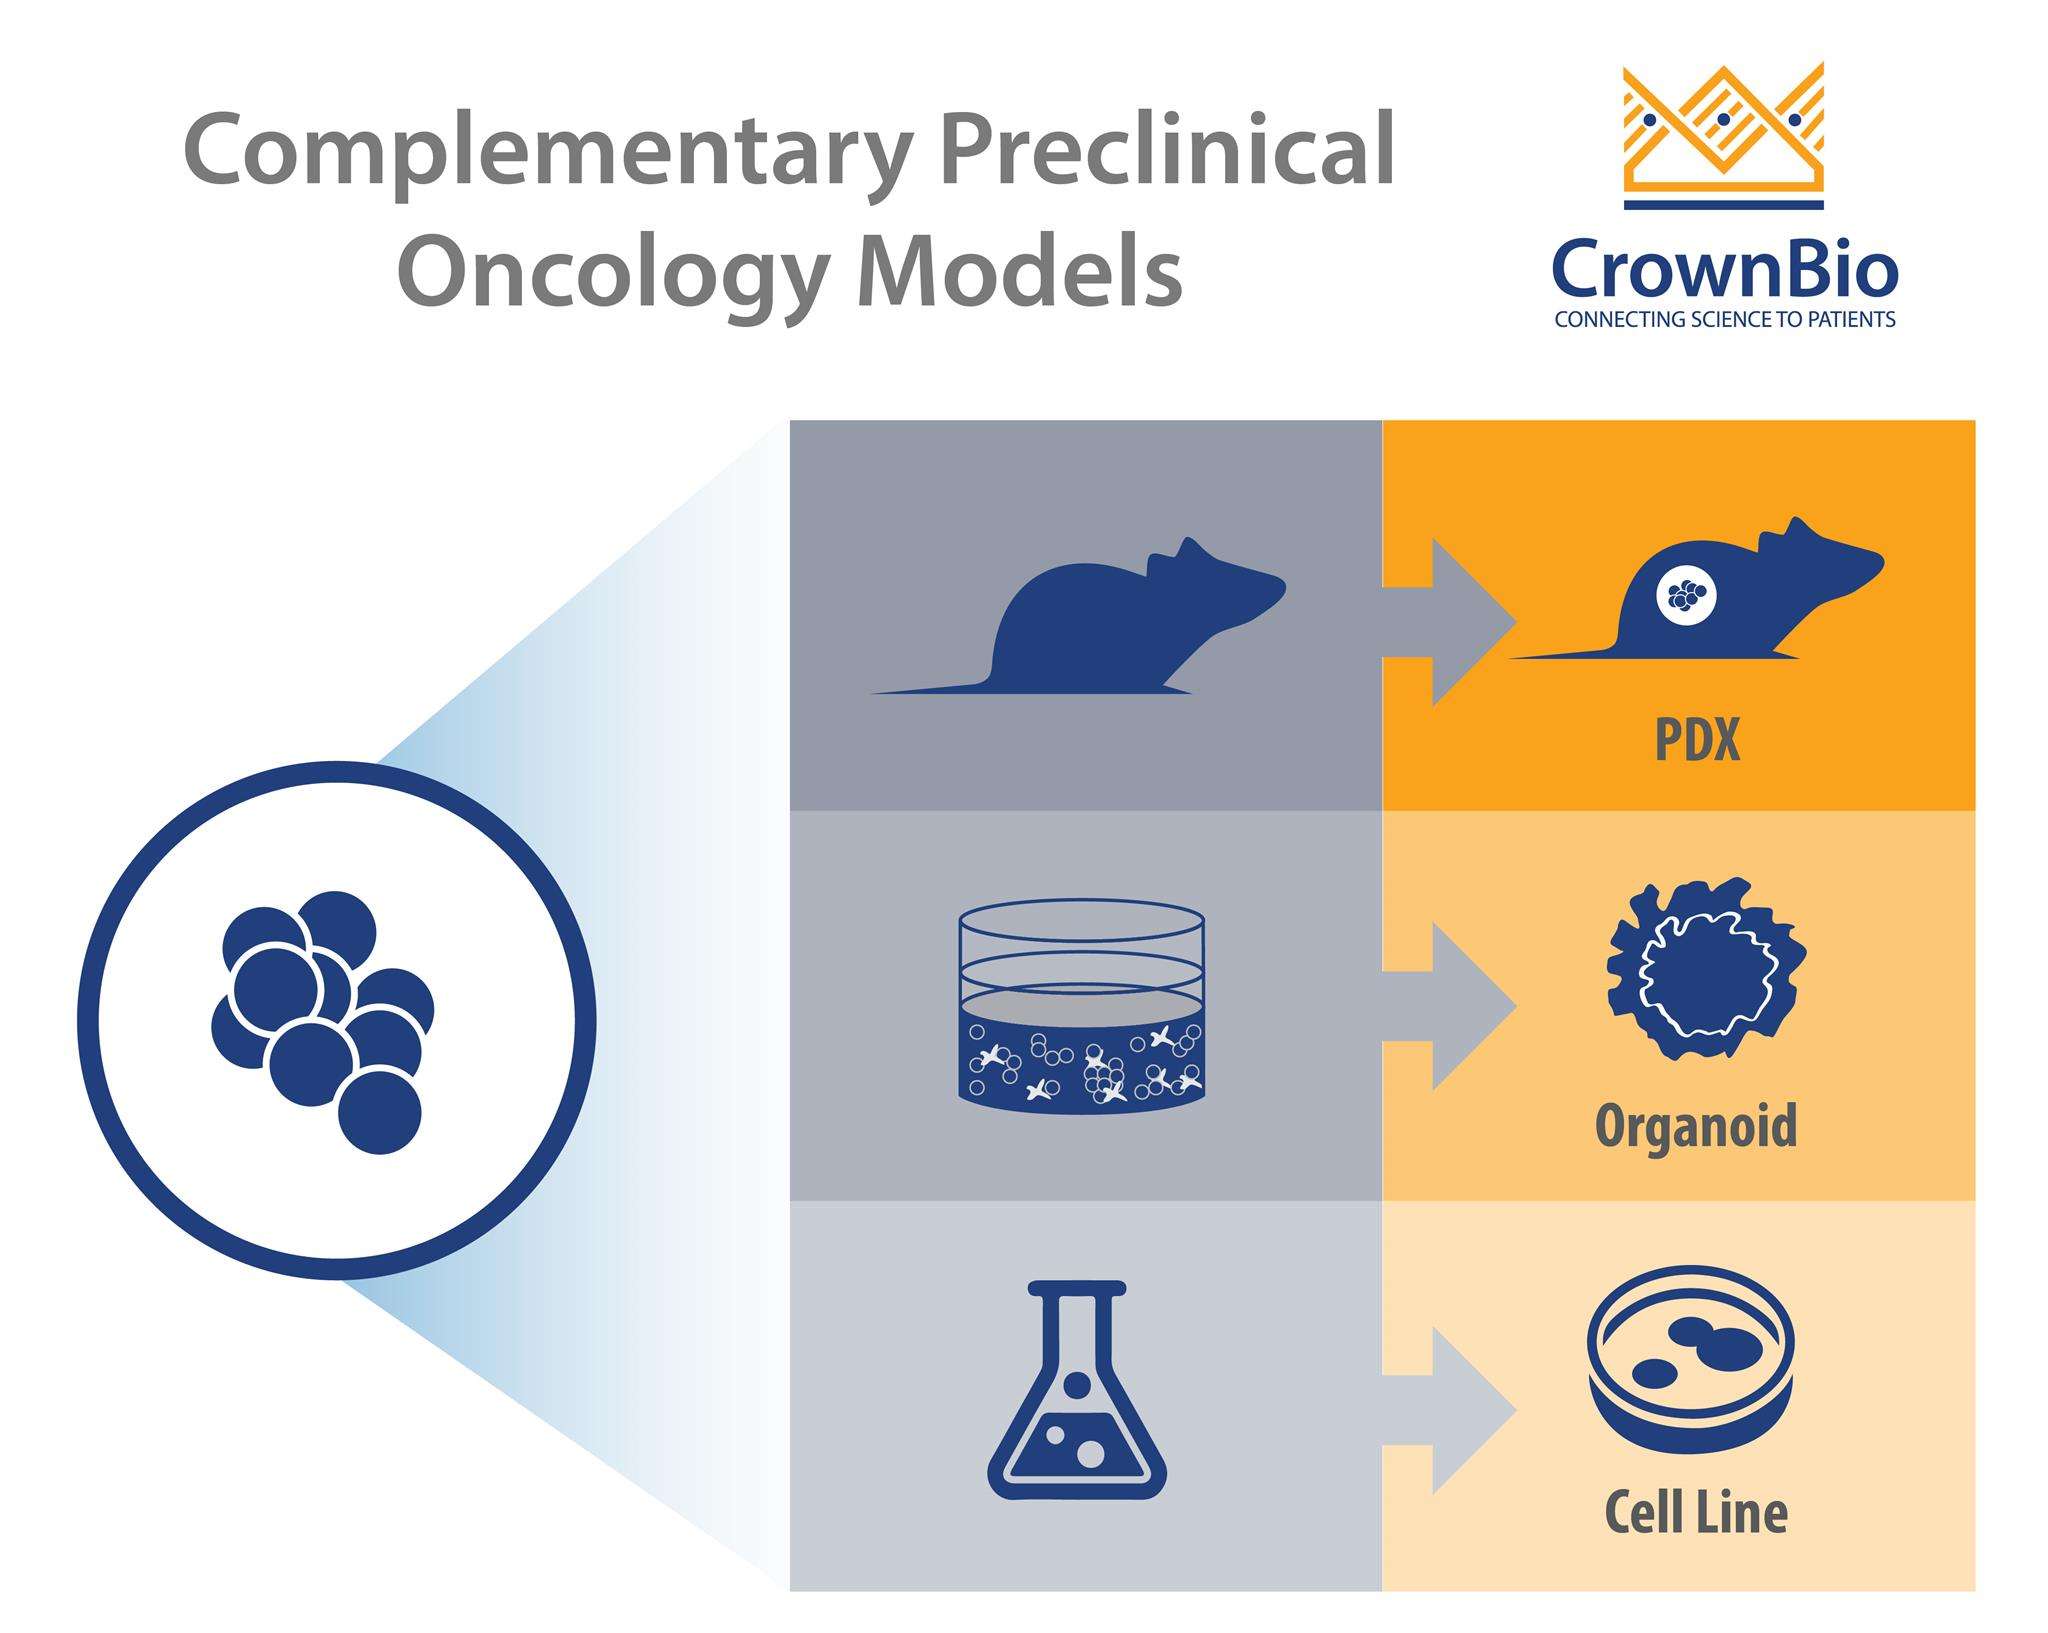 Where Do Organoids Fit in Preclinical Cancer Modeling?